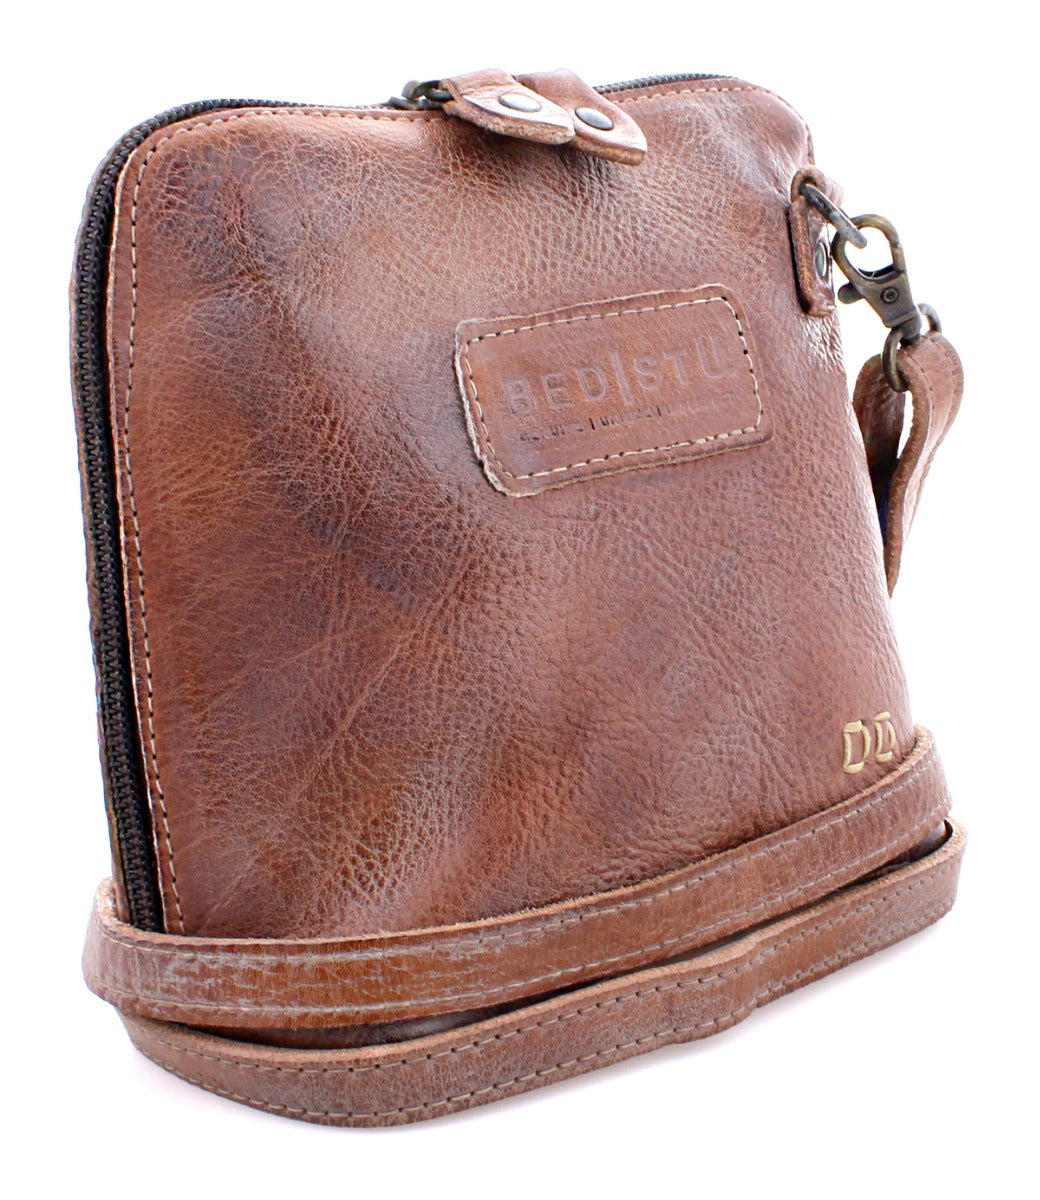 A Ventura brown leather purse with a zipper from Bed Stu.